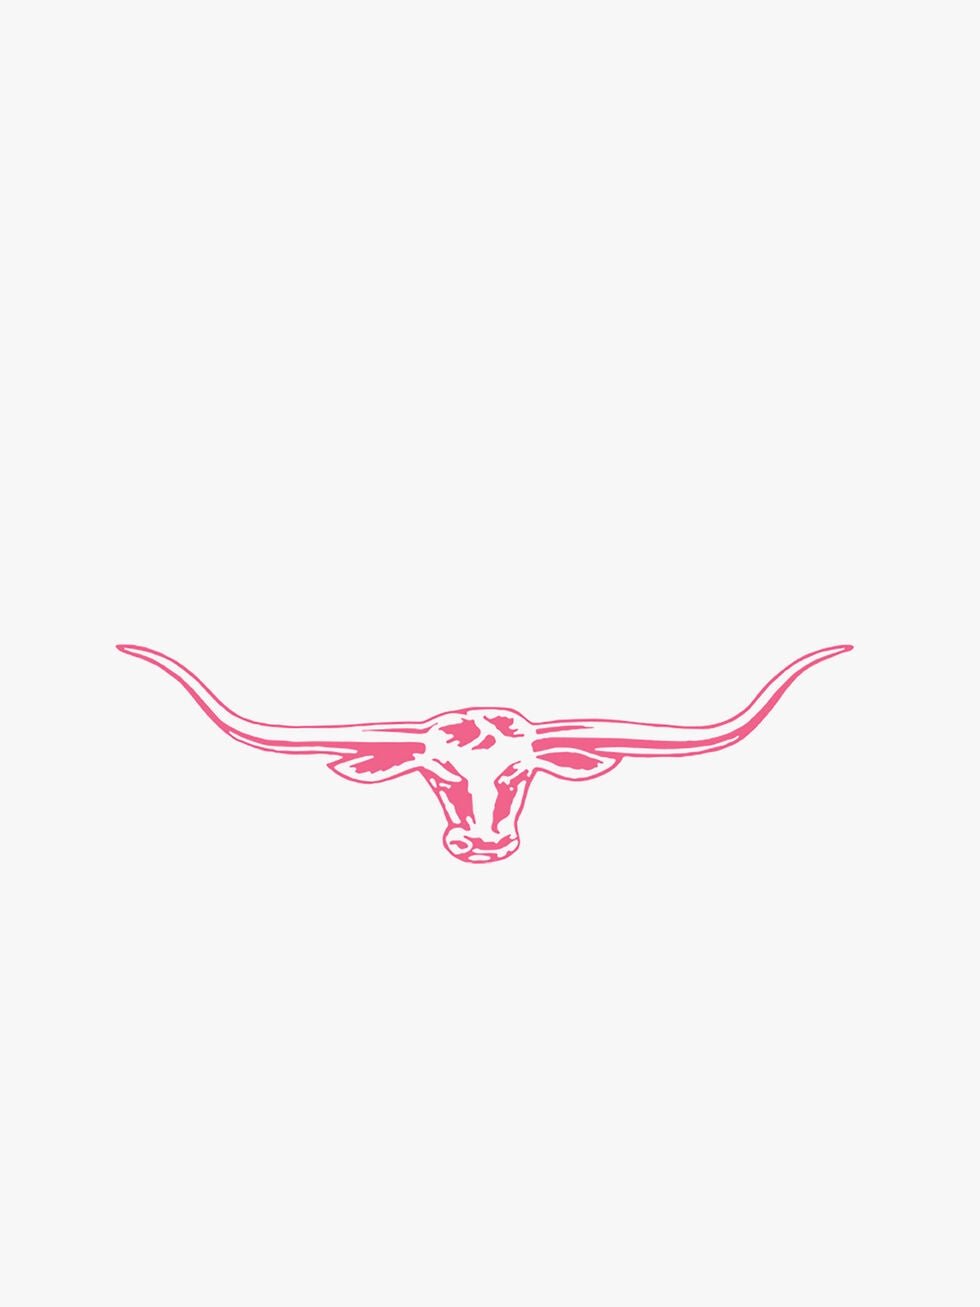 RMW Longhorn Decal - Thomson's Suits Ltd - Pink - - 28031